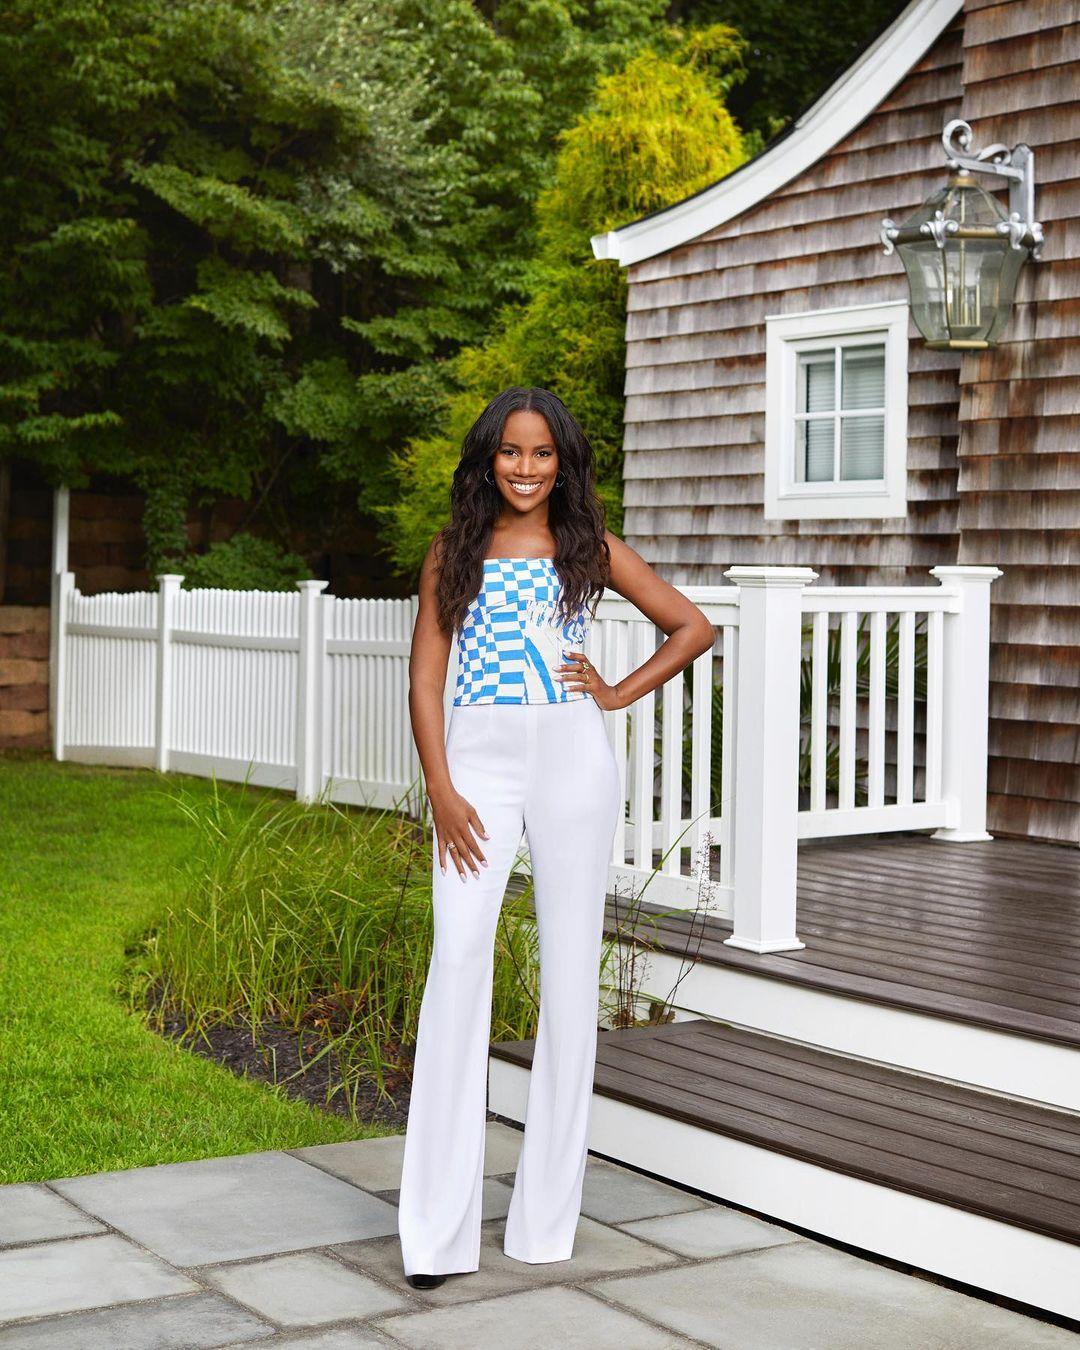 'Summer House' Gabby Prescod 'Hurt' To See Her Co-Stars Trash Talking Her